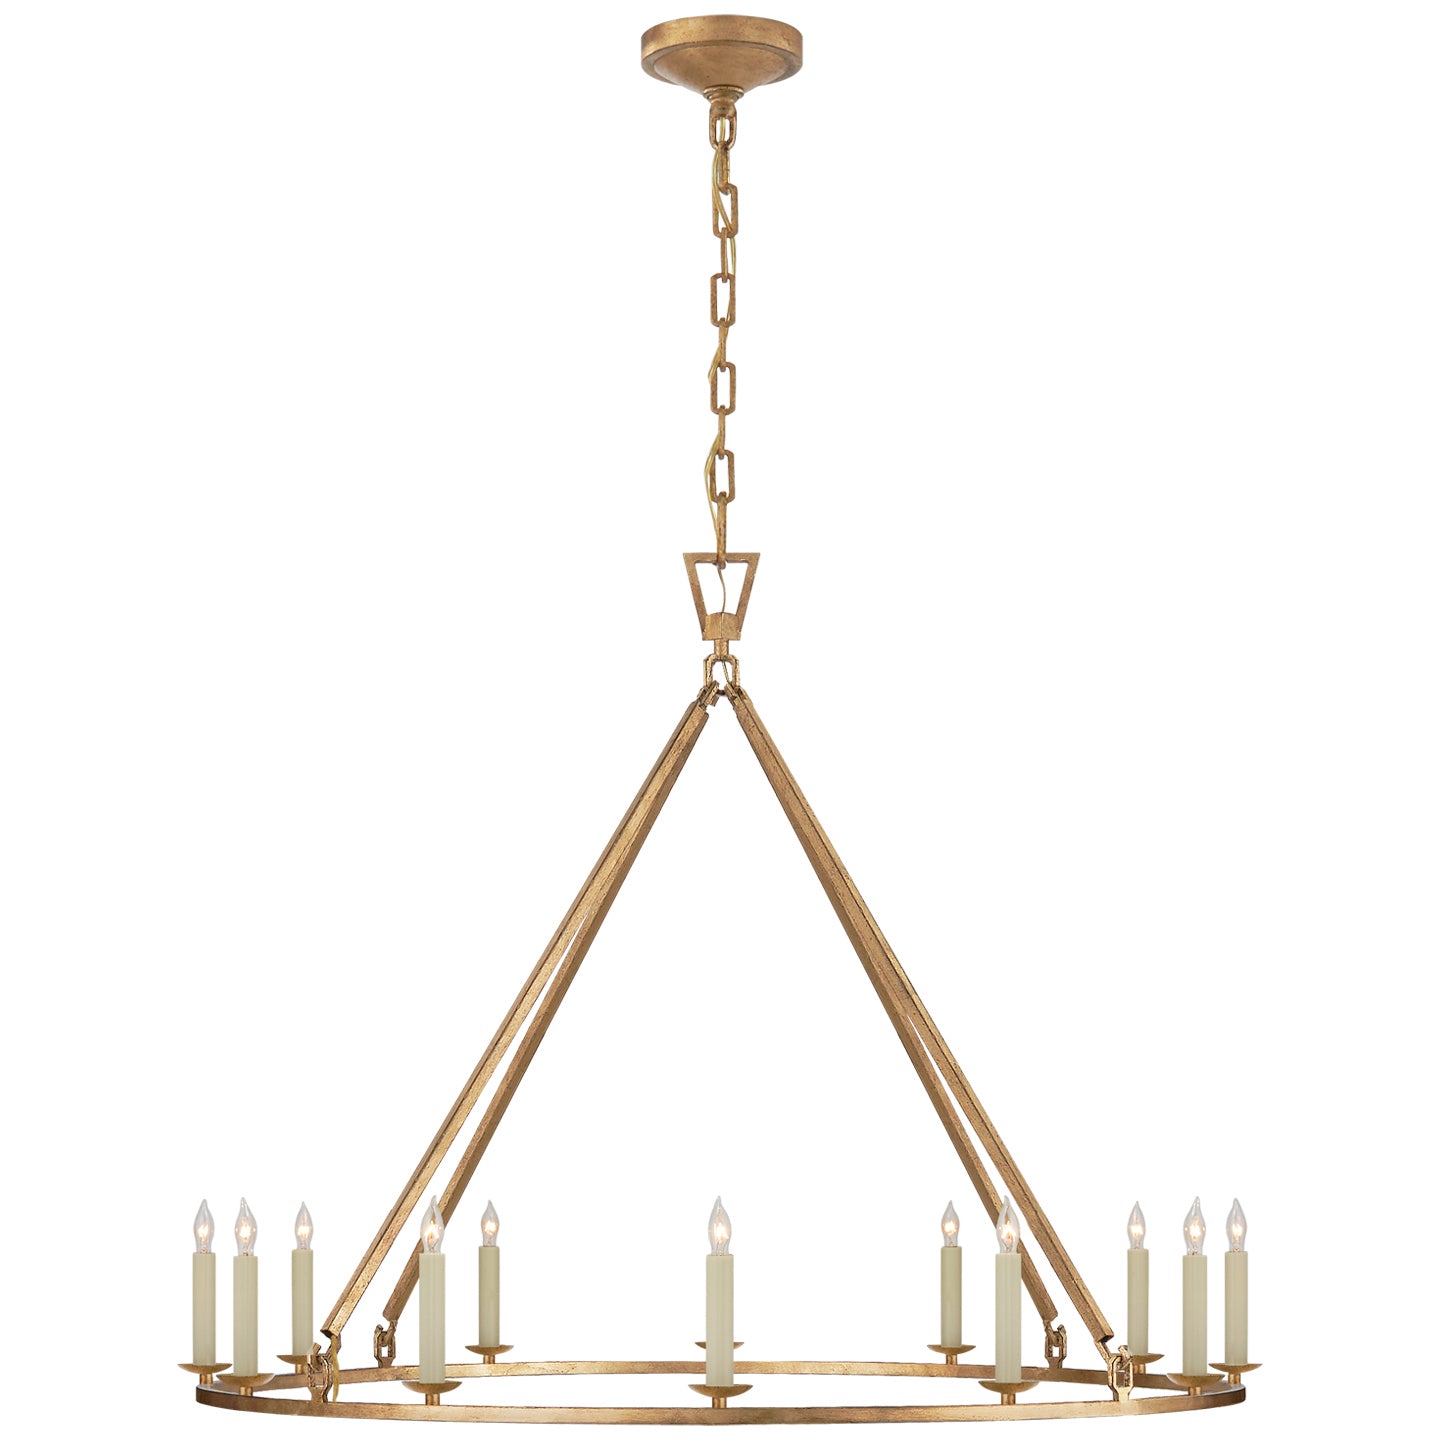 Load image into Gallery viewer, Visual Comfort Signature - CHC 5174GI - 12 Light Chandelier - Darlana Ring - Gilded Iron
